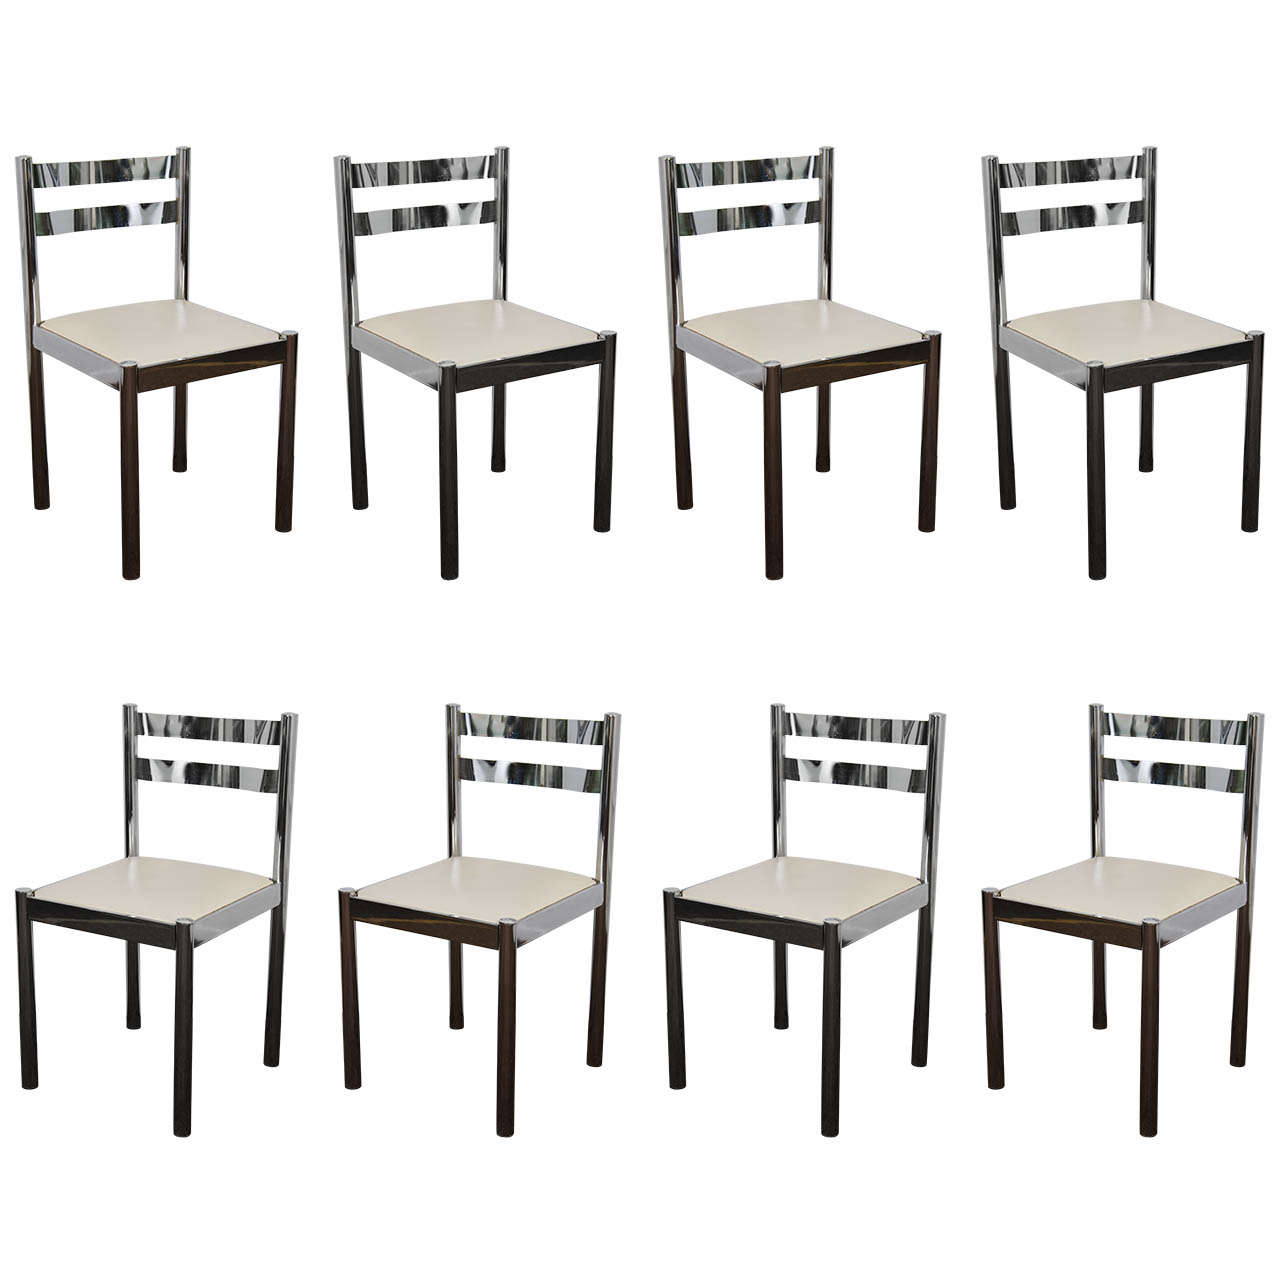 A vintage set of eight chrome chairs upholstered in white vinyl with a chrome and glass kitchen or dining room table.

The chairs are in vintage condition with age appropriate wear. Six of the chairs have some scratches, pitting and/or chipping;